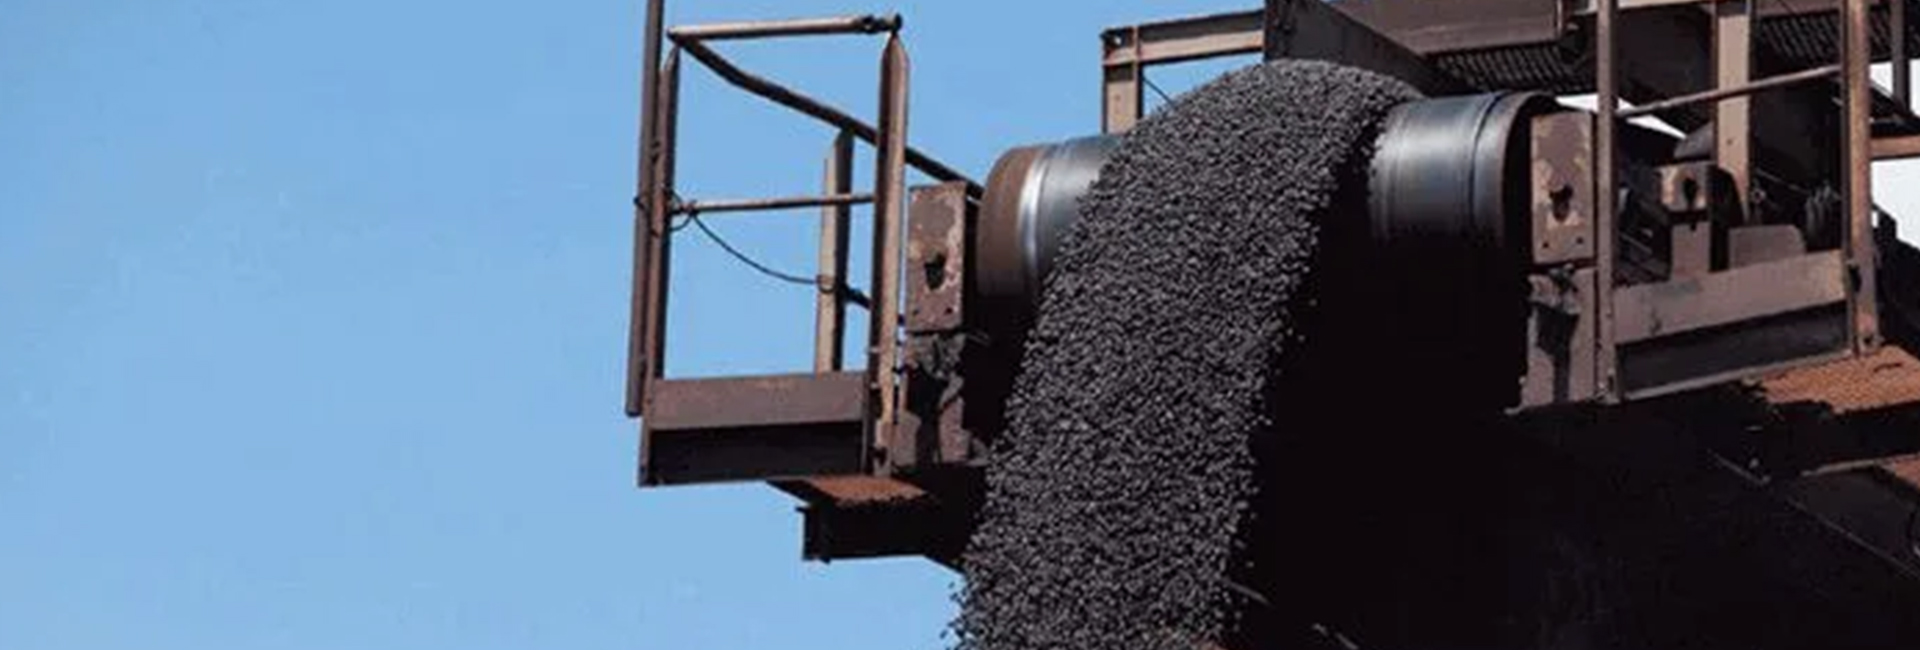 How Is Iron Ore Processed into Pellets?